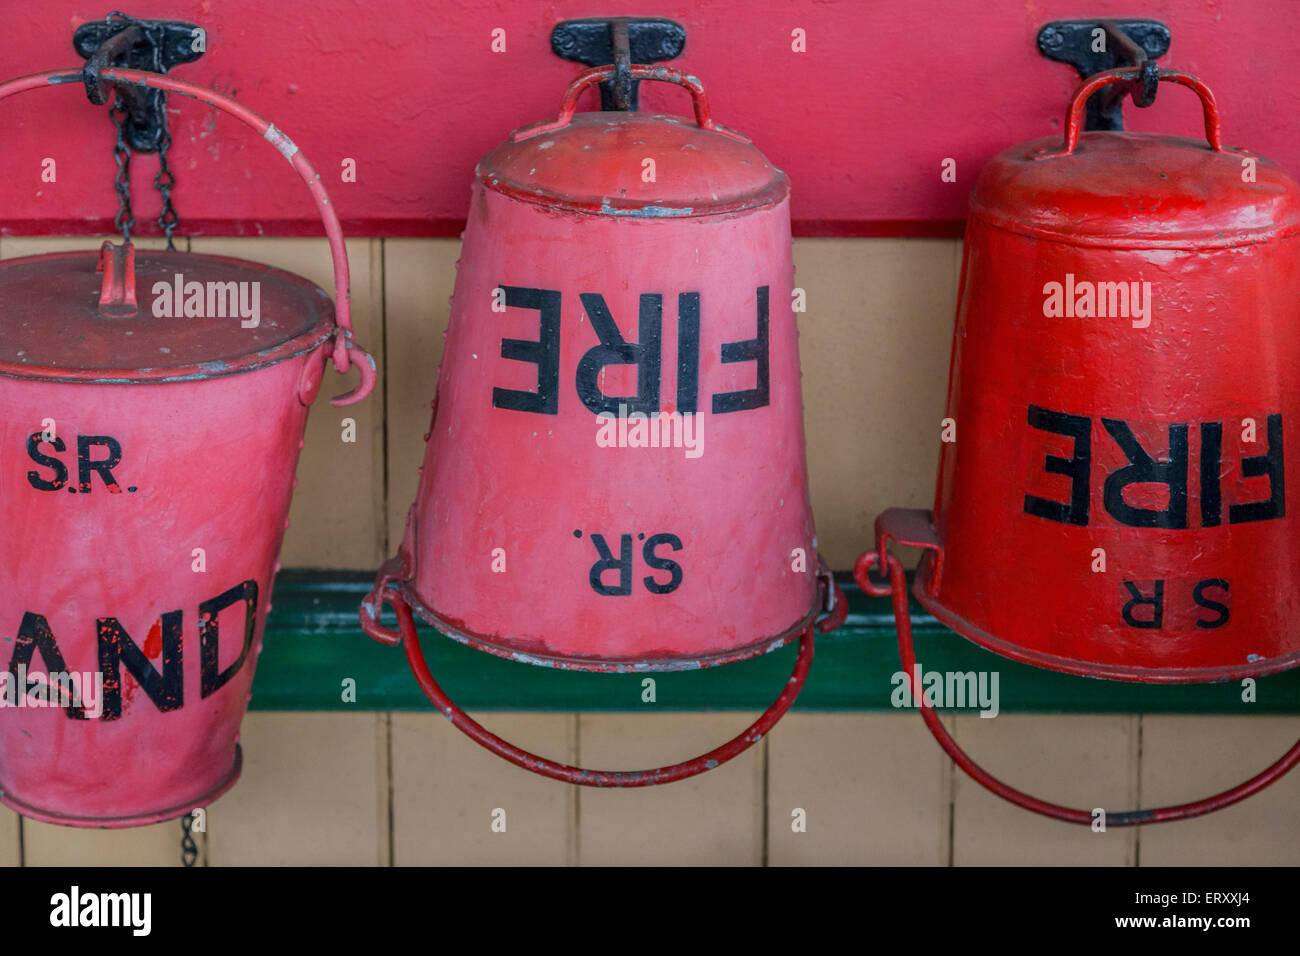 Red fire buckets at Horsted Keynes Railway Station on the Bluebell Railway Heritage Line, West Sussex, England, United Kingdom. Stock Photo